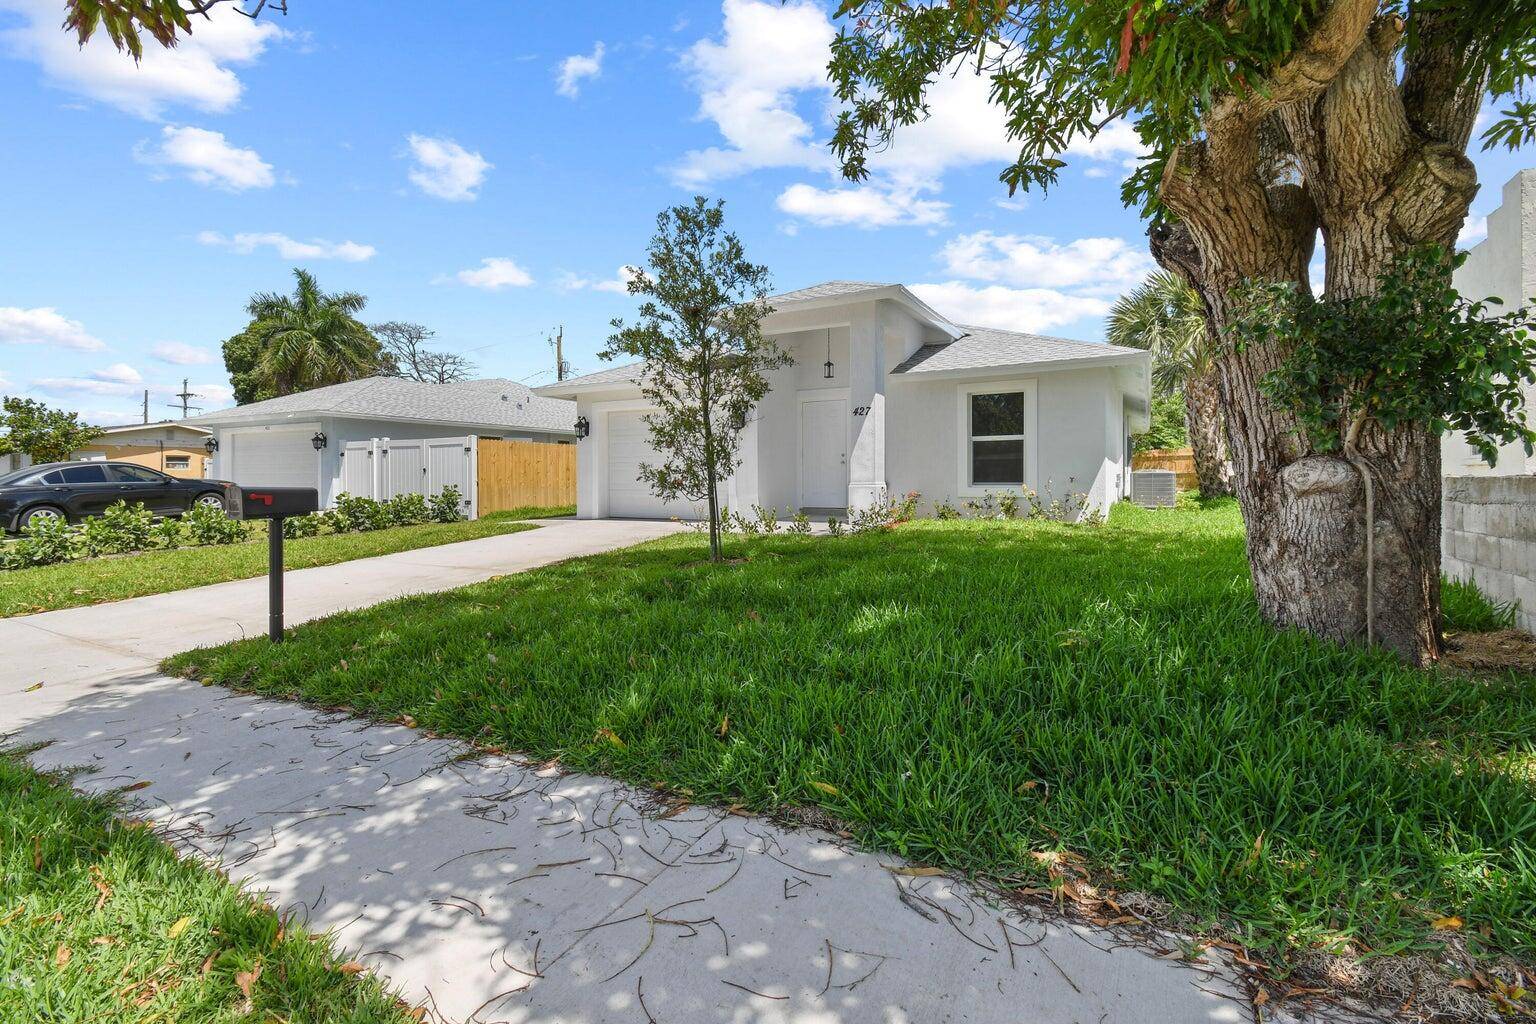 Newly built home centrally located in West Palm Beach.